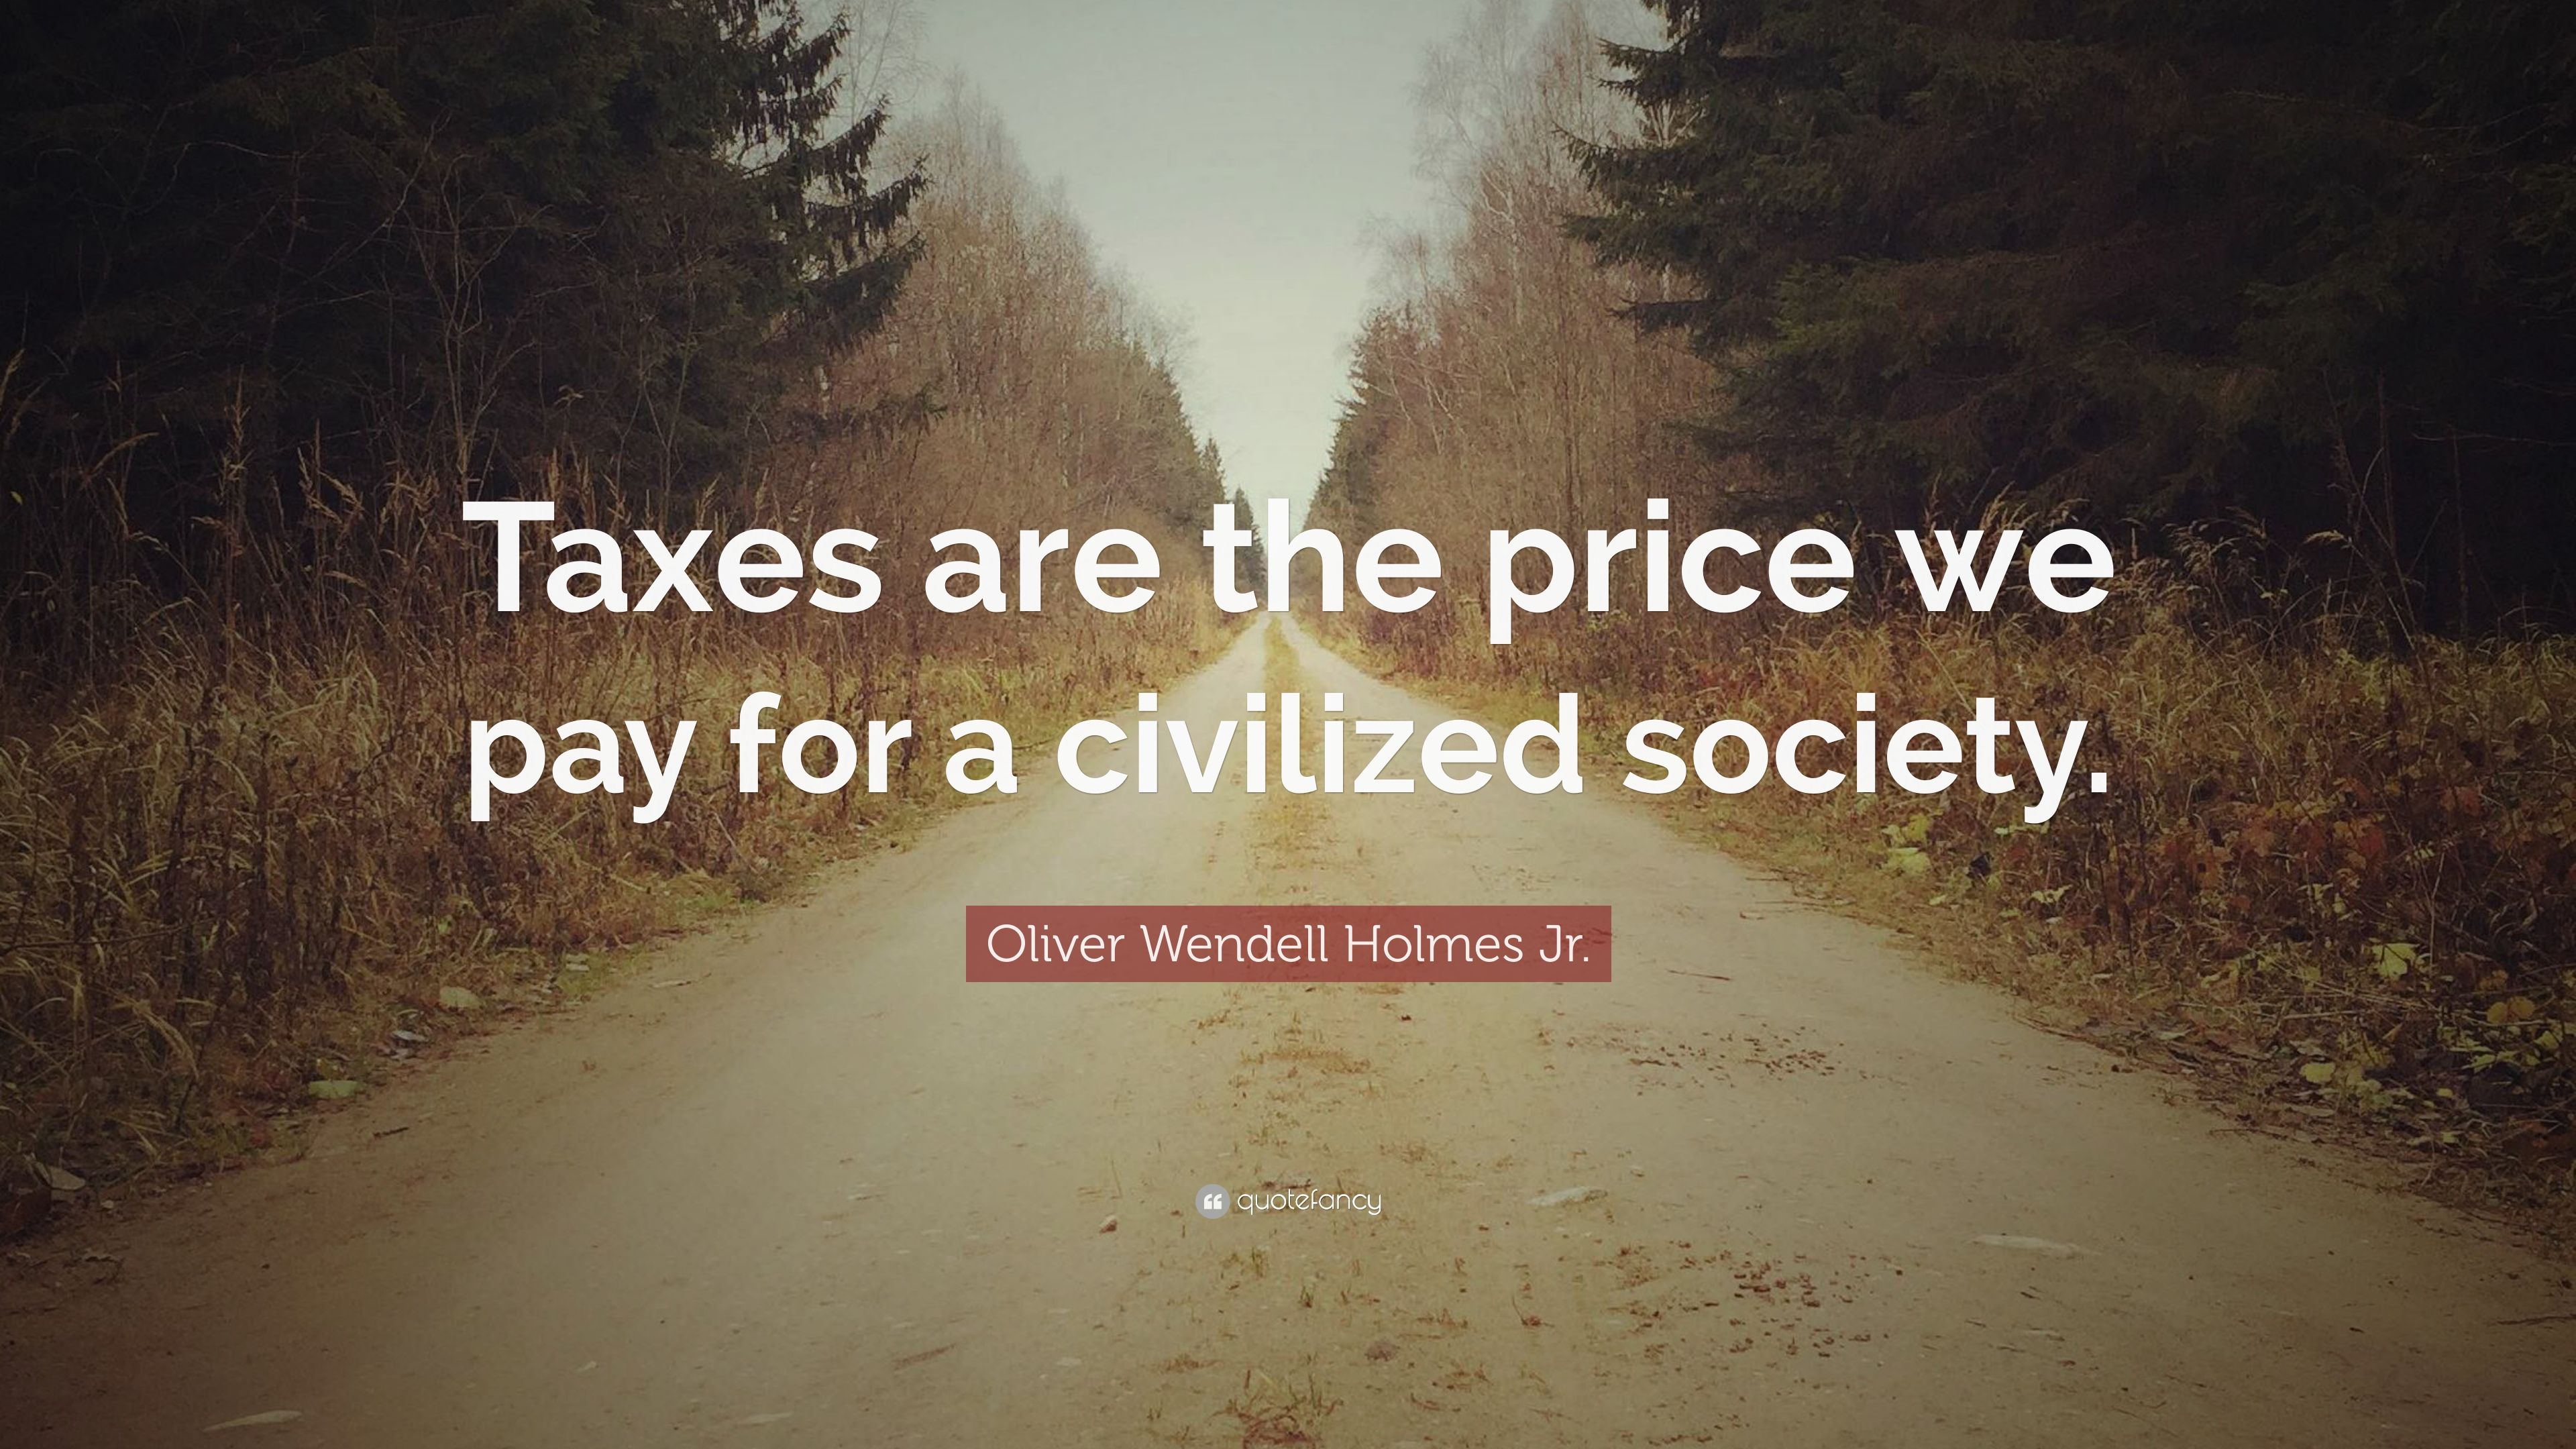 Oliver Wendell Holmes Jr. Quote: “Taxes are the price we pay for a civilized society.” (6 wallpaper)